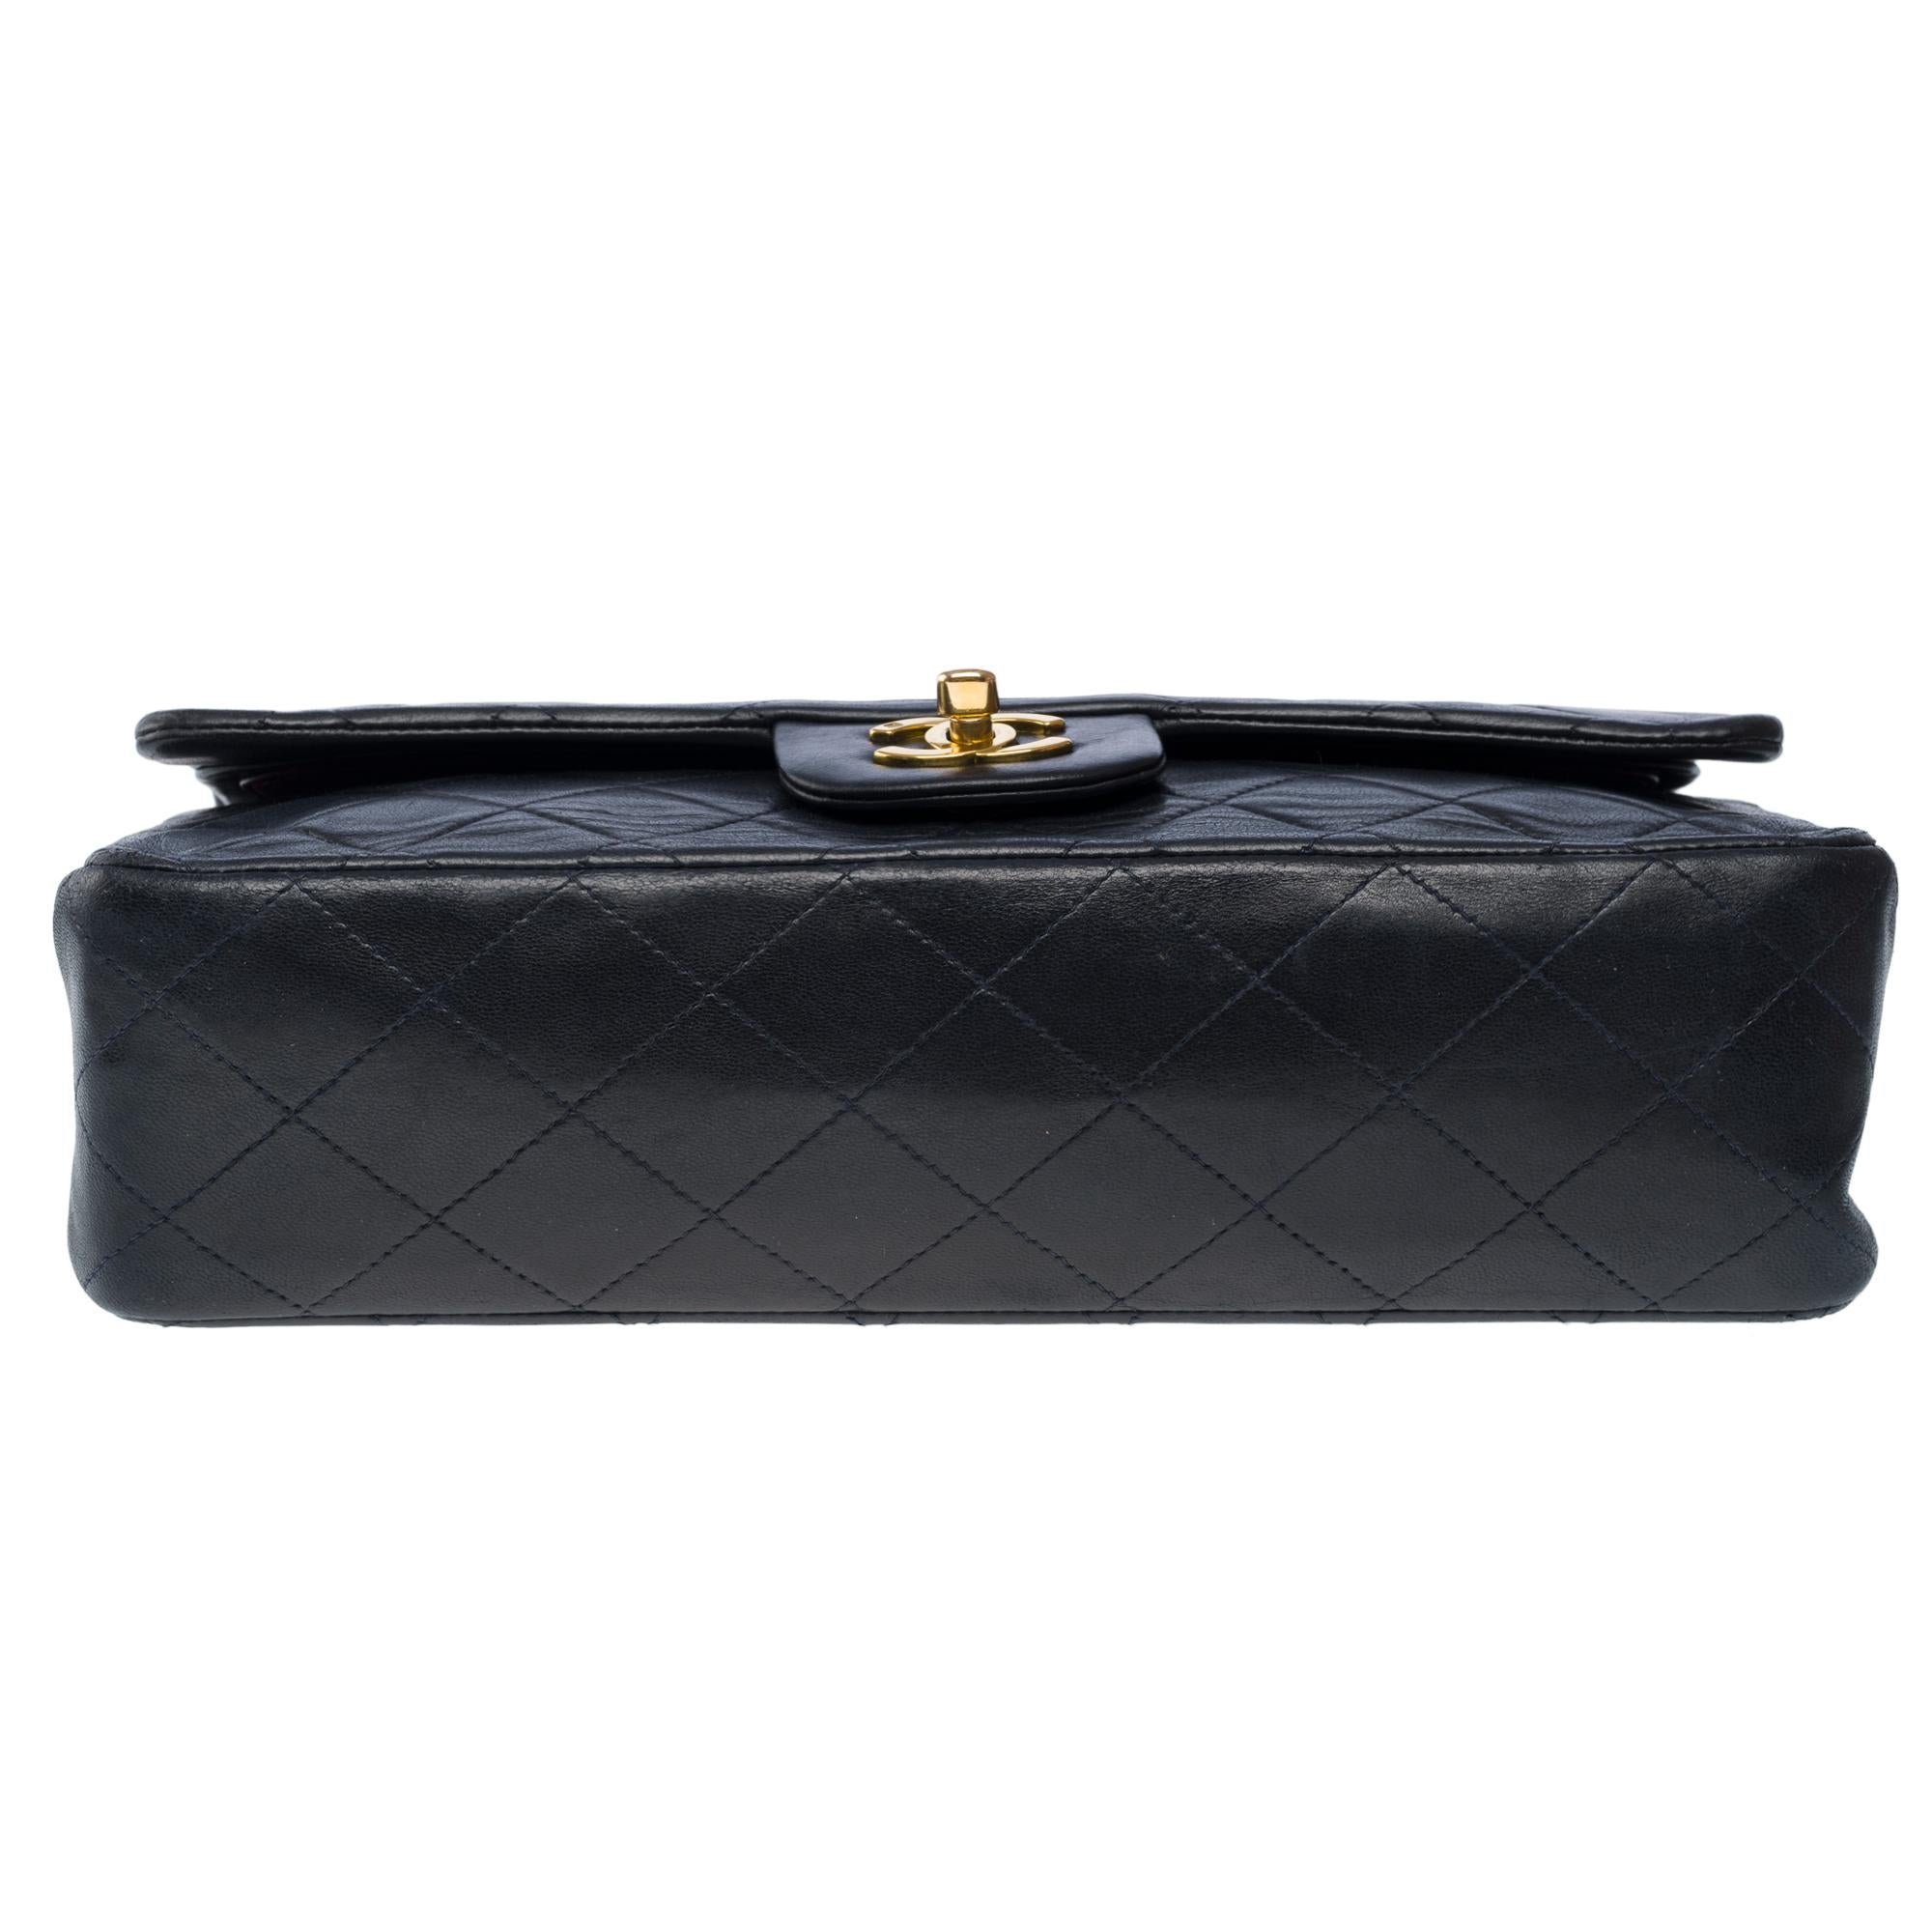 Chanel Timeless double flap shoulder bag in Navy Blue quilted lambskin , GHW For Sale 6